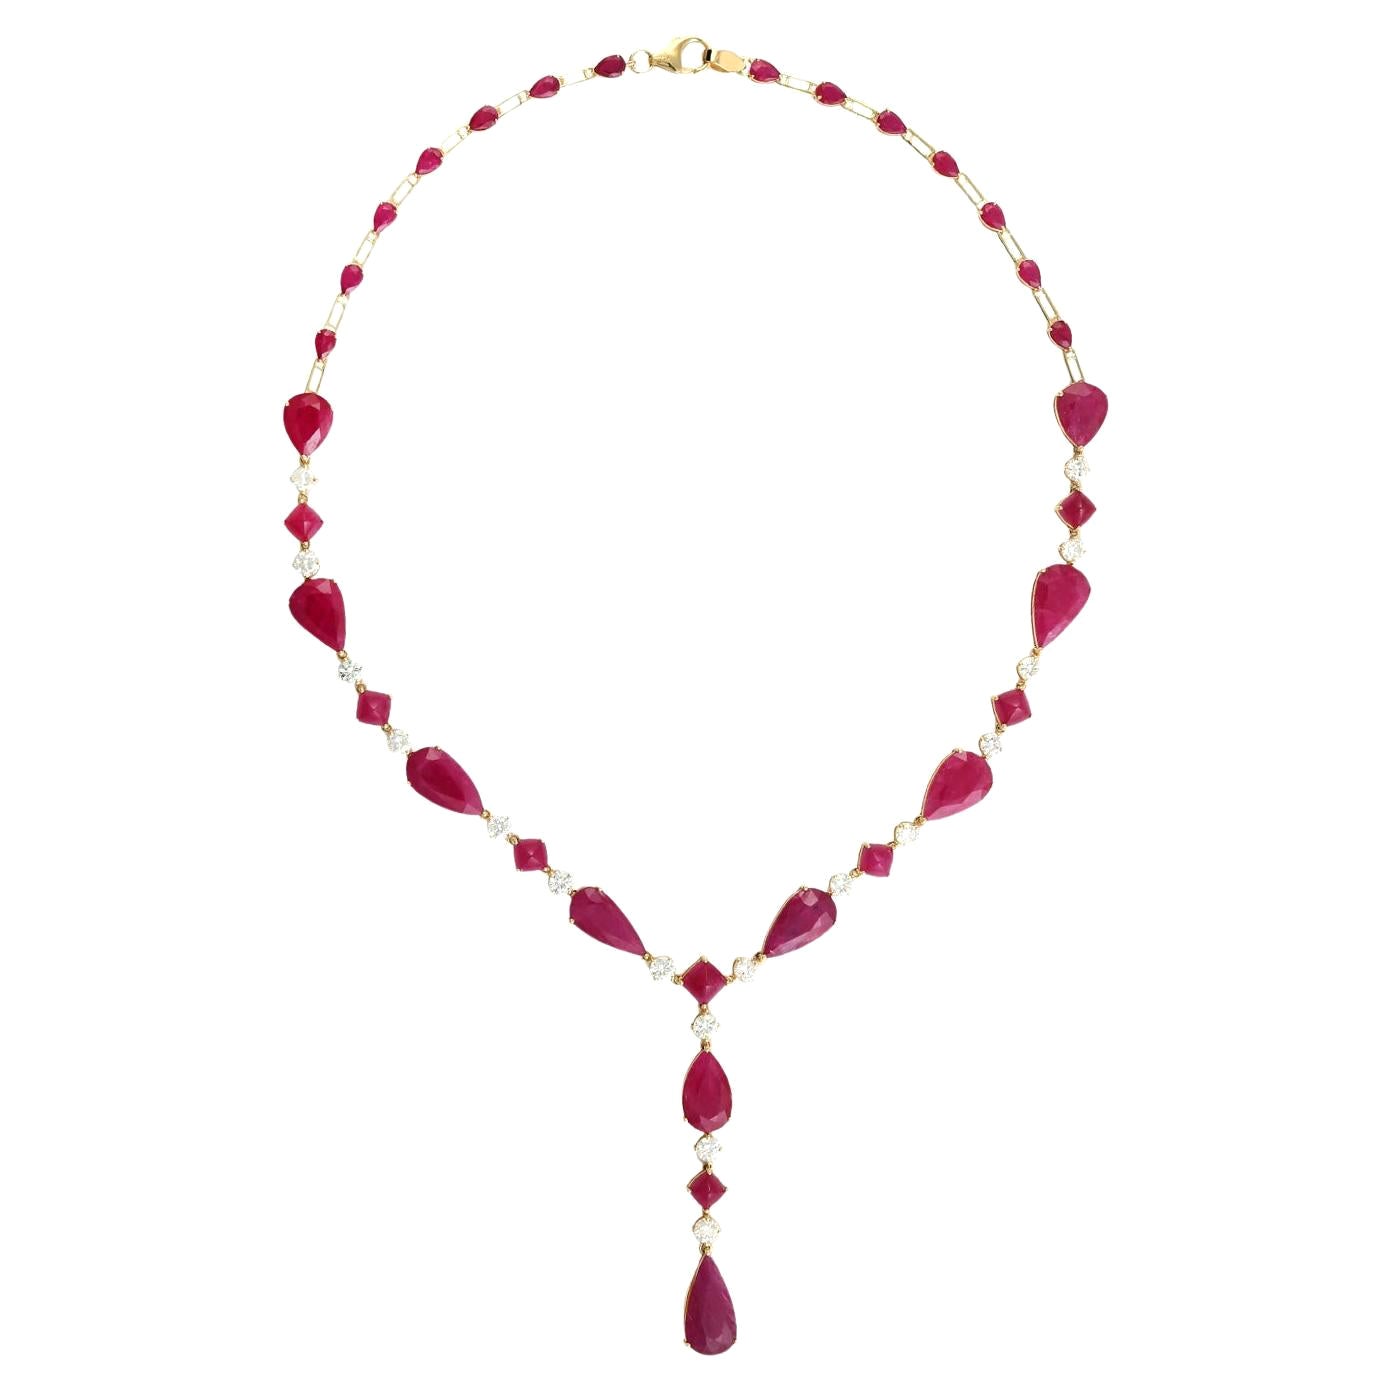 Tear Drop Mozambique Ruby Link Necklace With Diamonds Made In 18k Yellow Gold